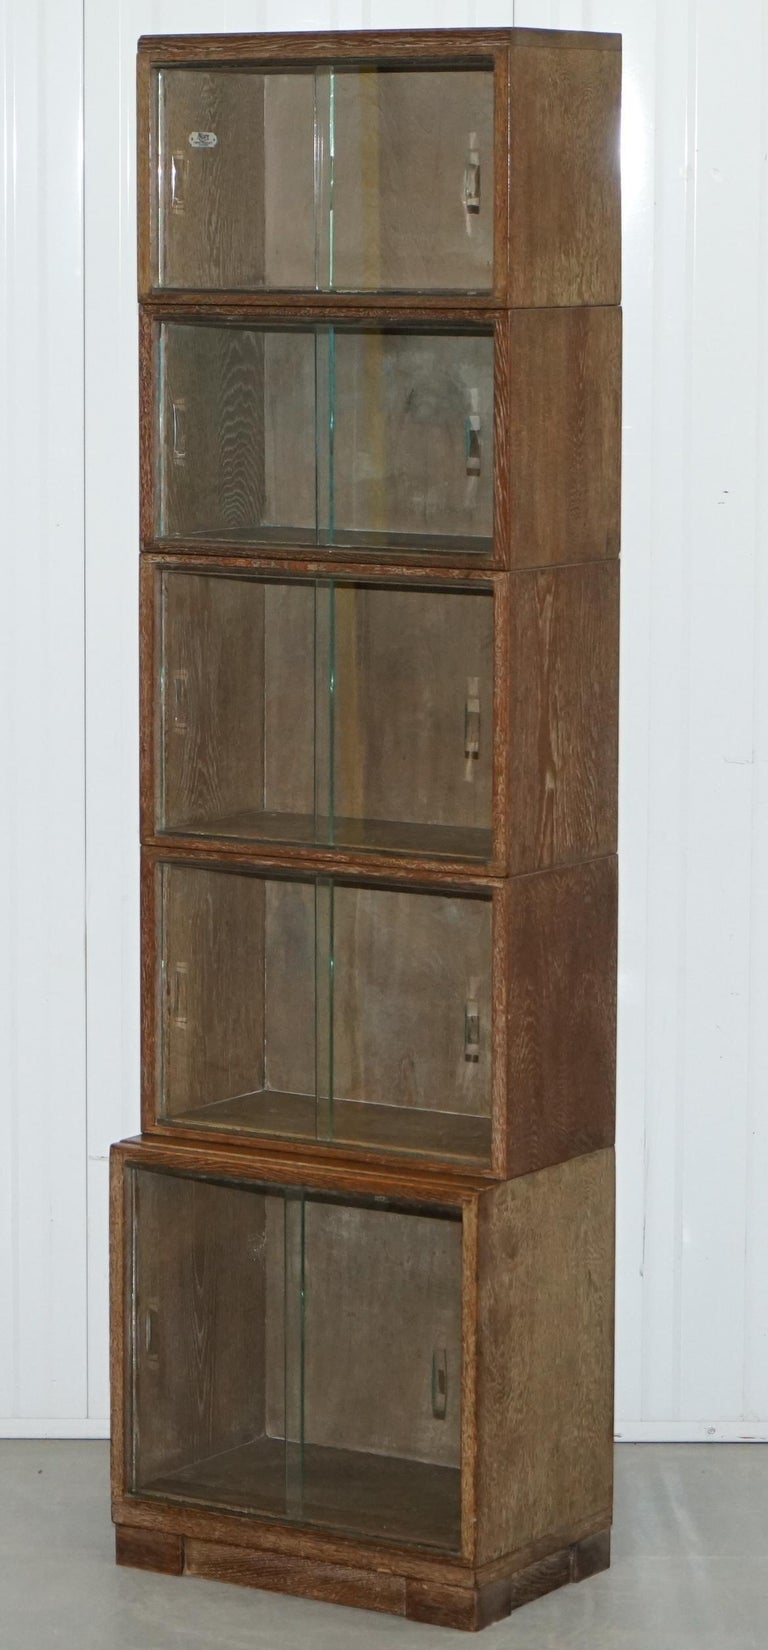 Limed Oak Modular Minty Oxford Antique Stacking Legal Bookcase